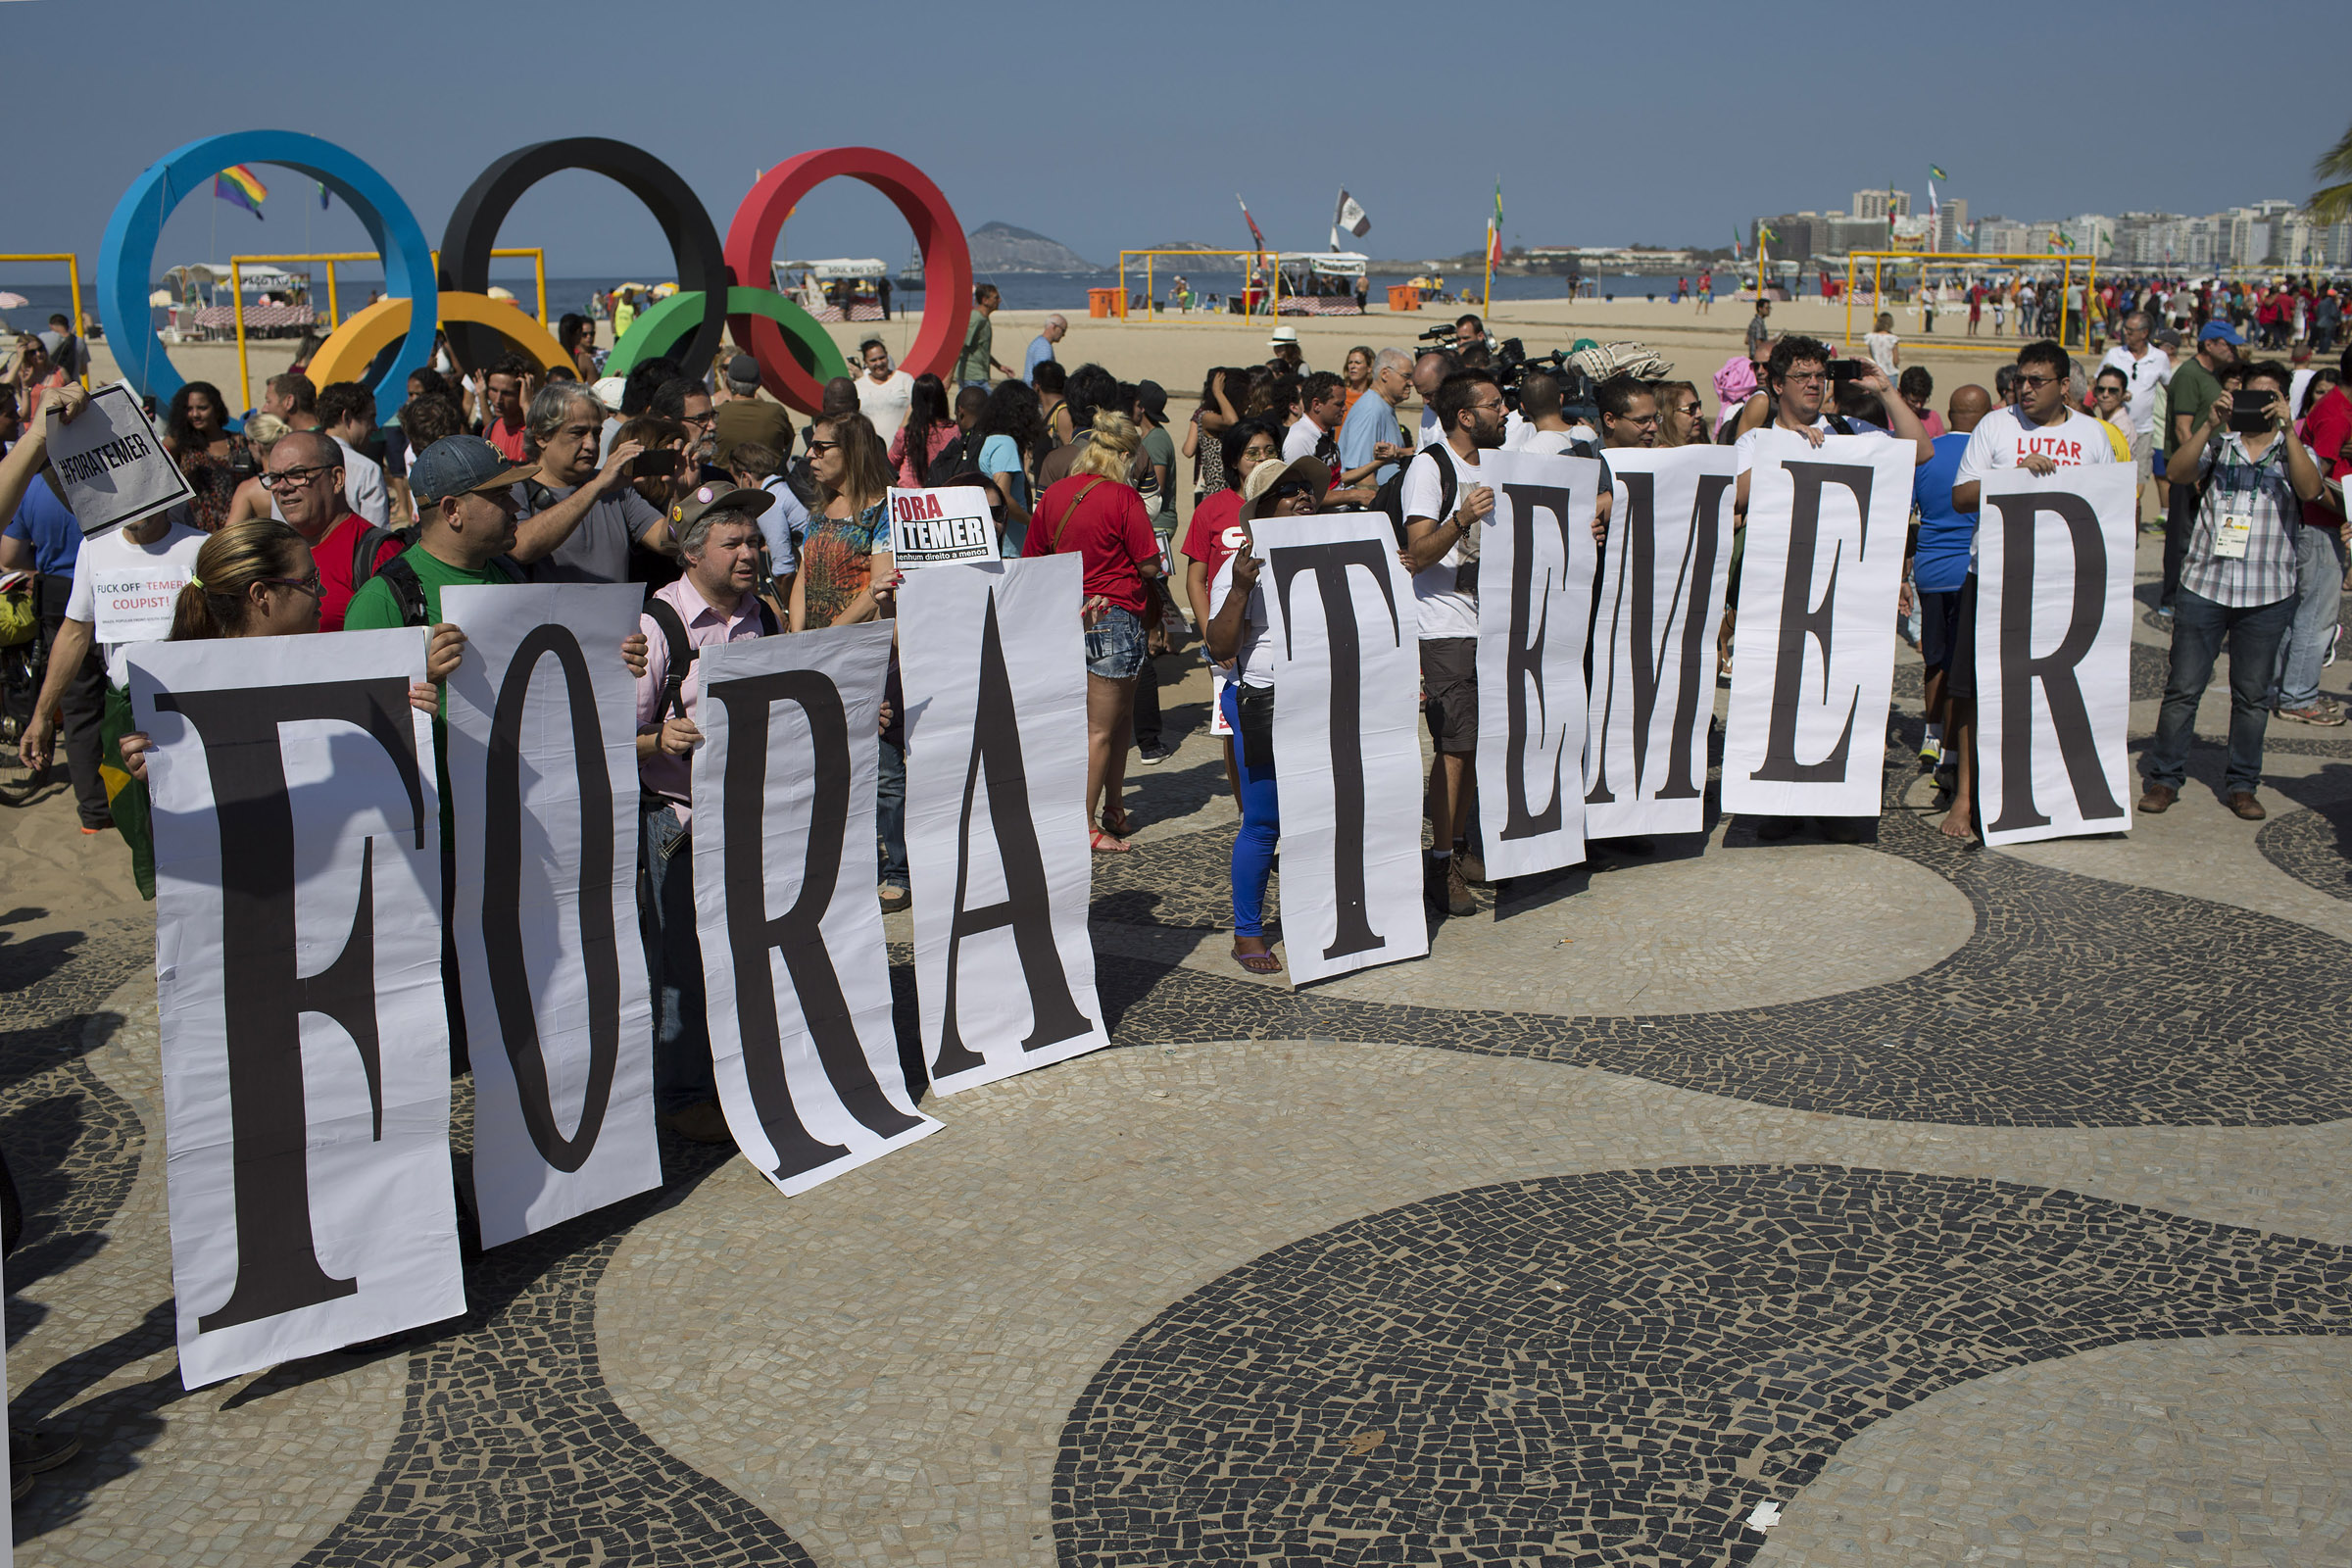 Judge rules #FORATEMER protests allowed at Olympics